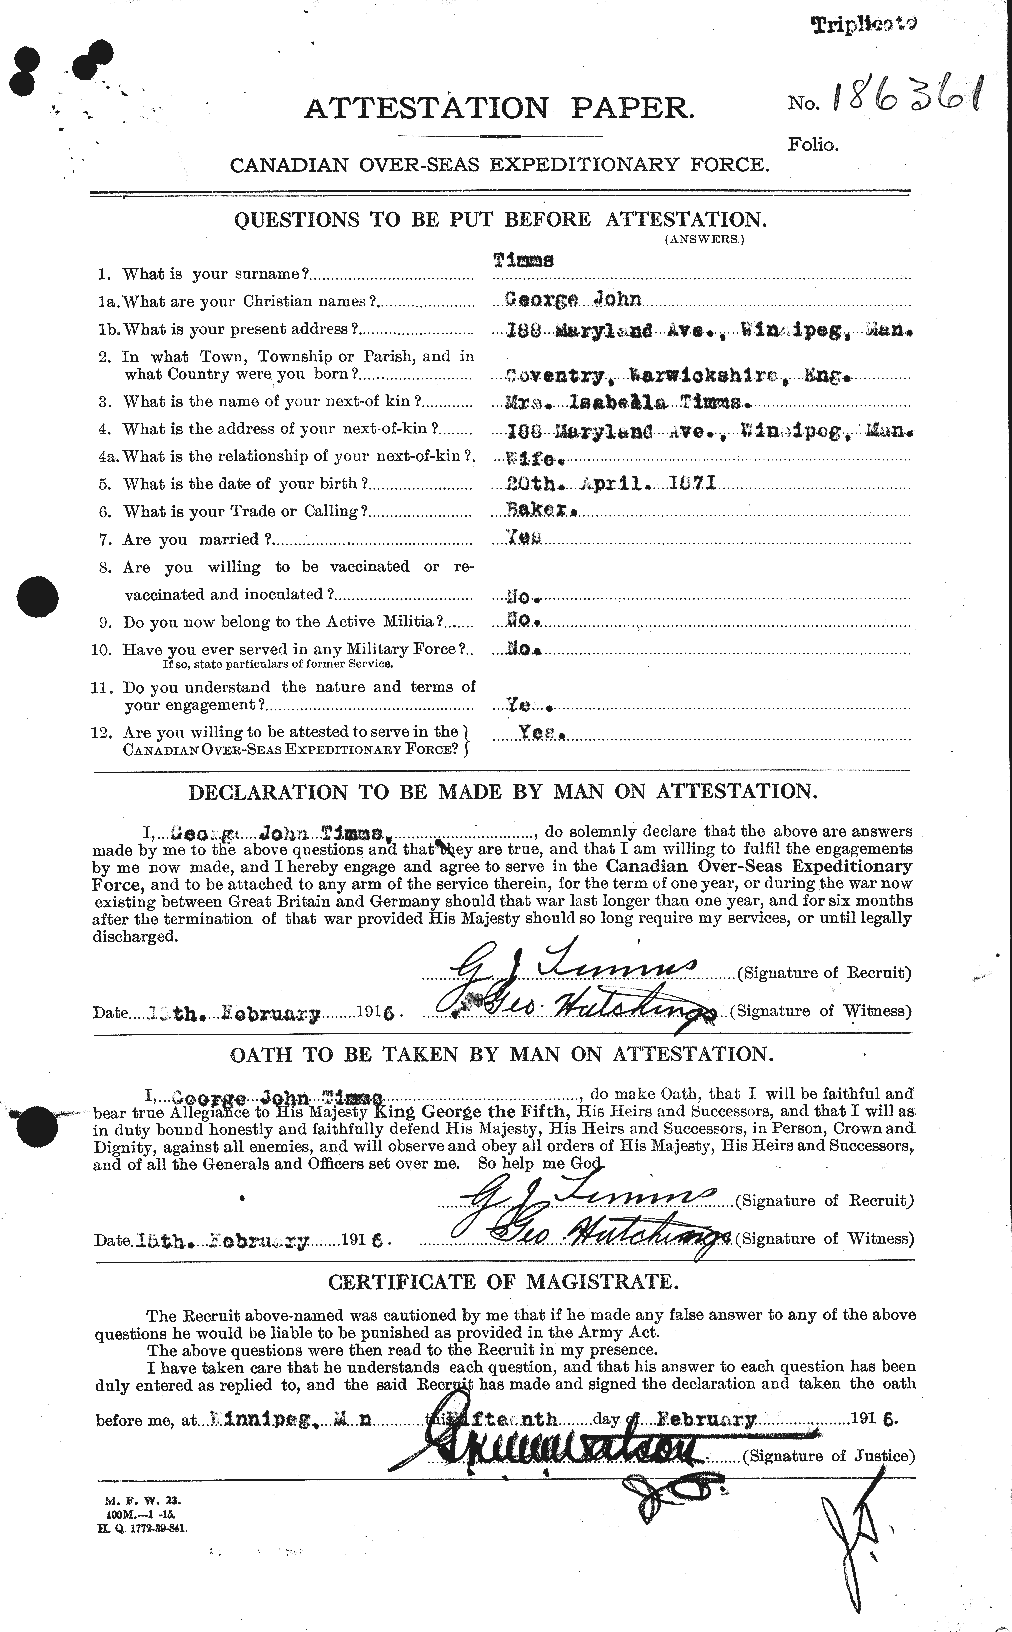 Personnel Records of the First World War - CEF 639903a